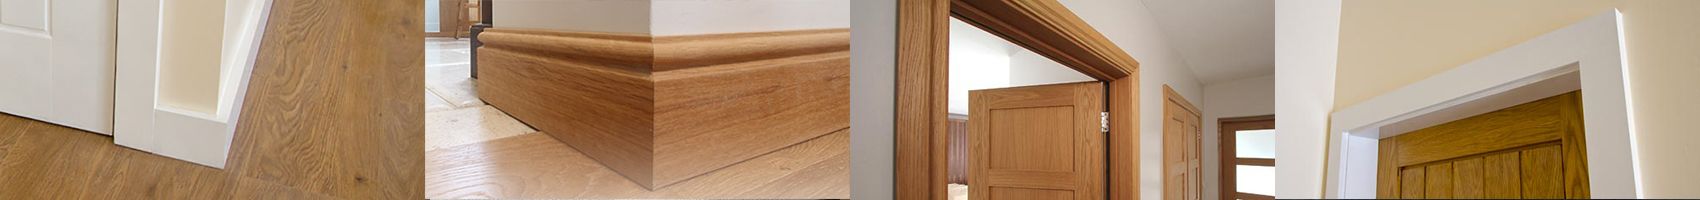 68mm Pine Ogee Architrave Skirting 4.4m